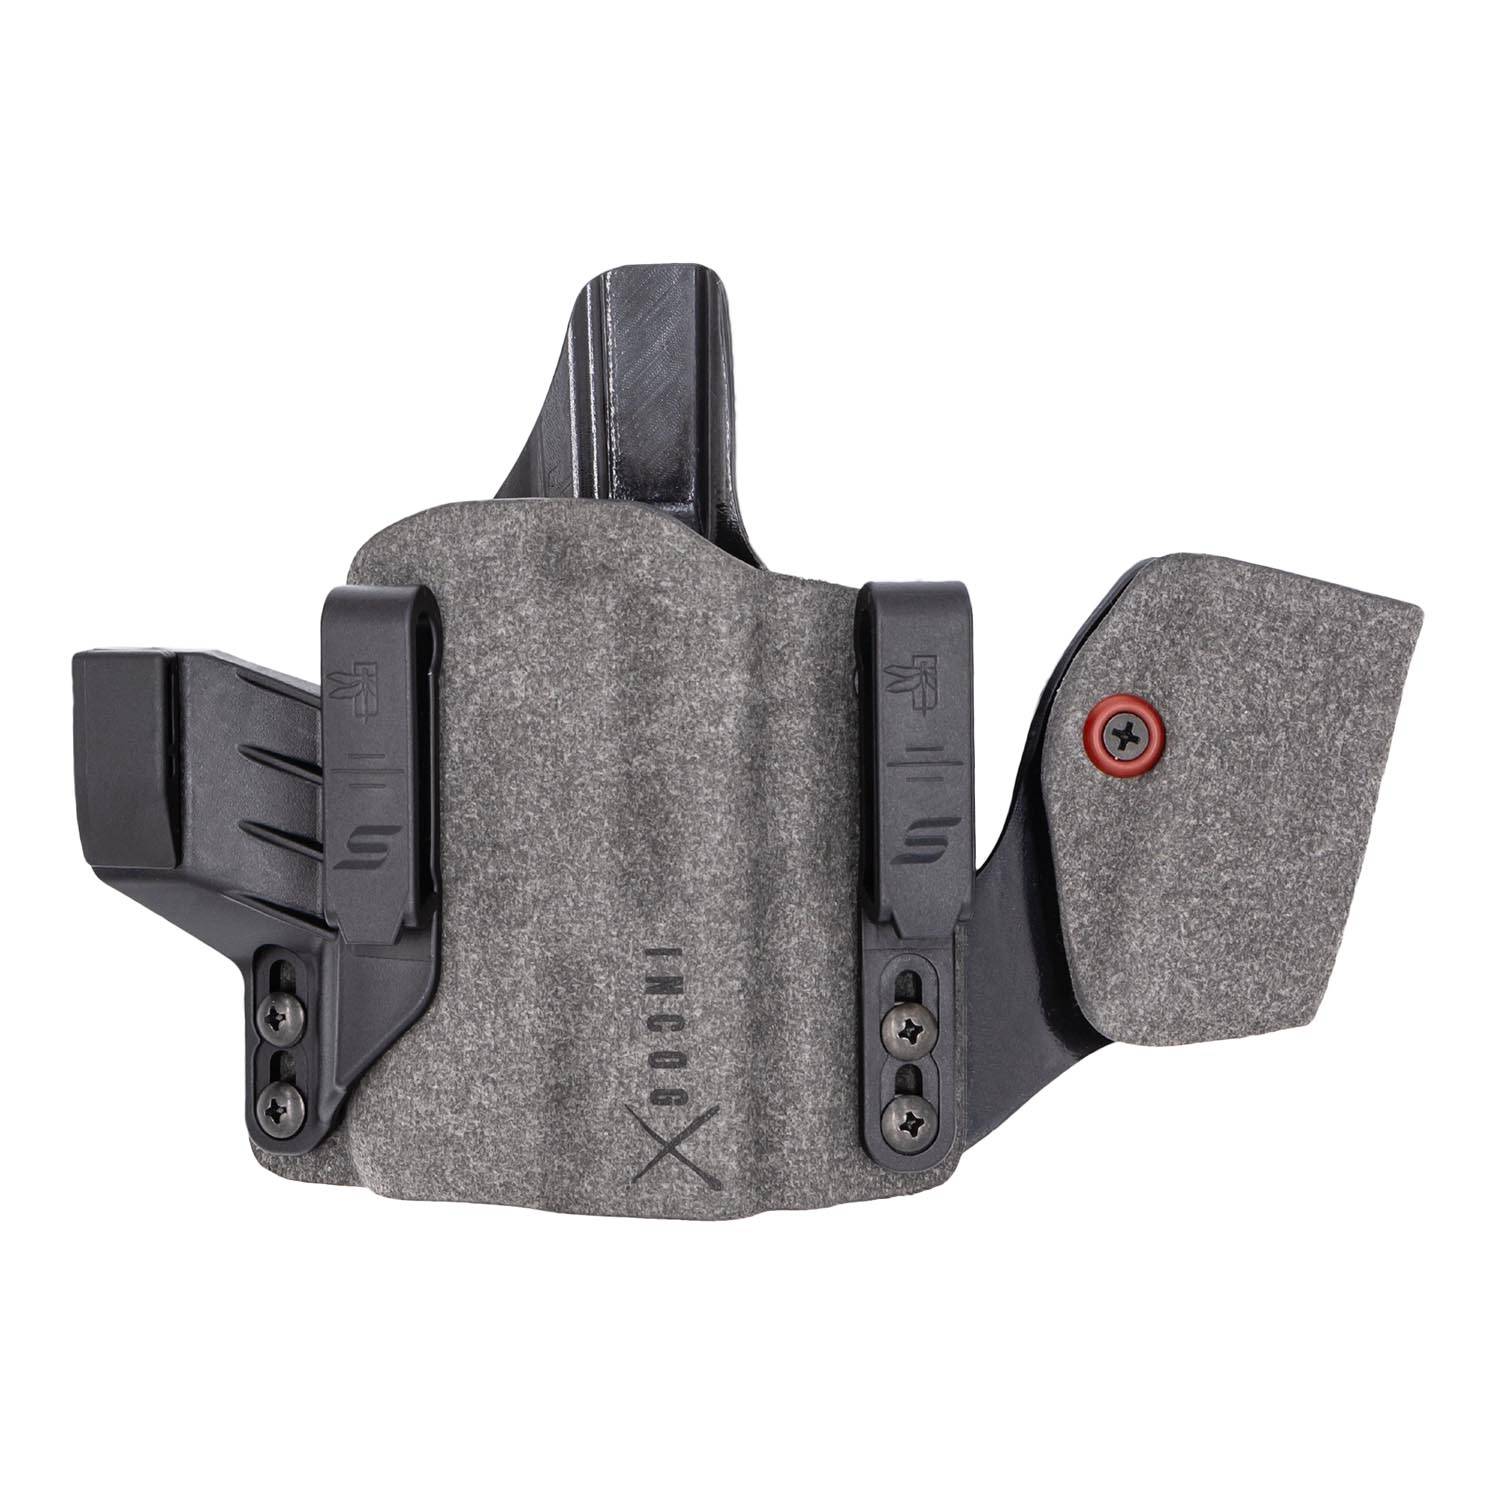 Safariland INCOG X IWB RDS Holster with Light & Mag Caddy